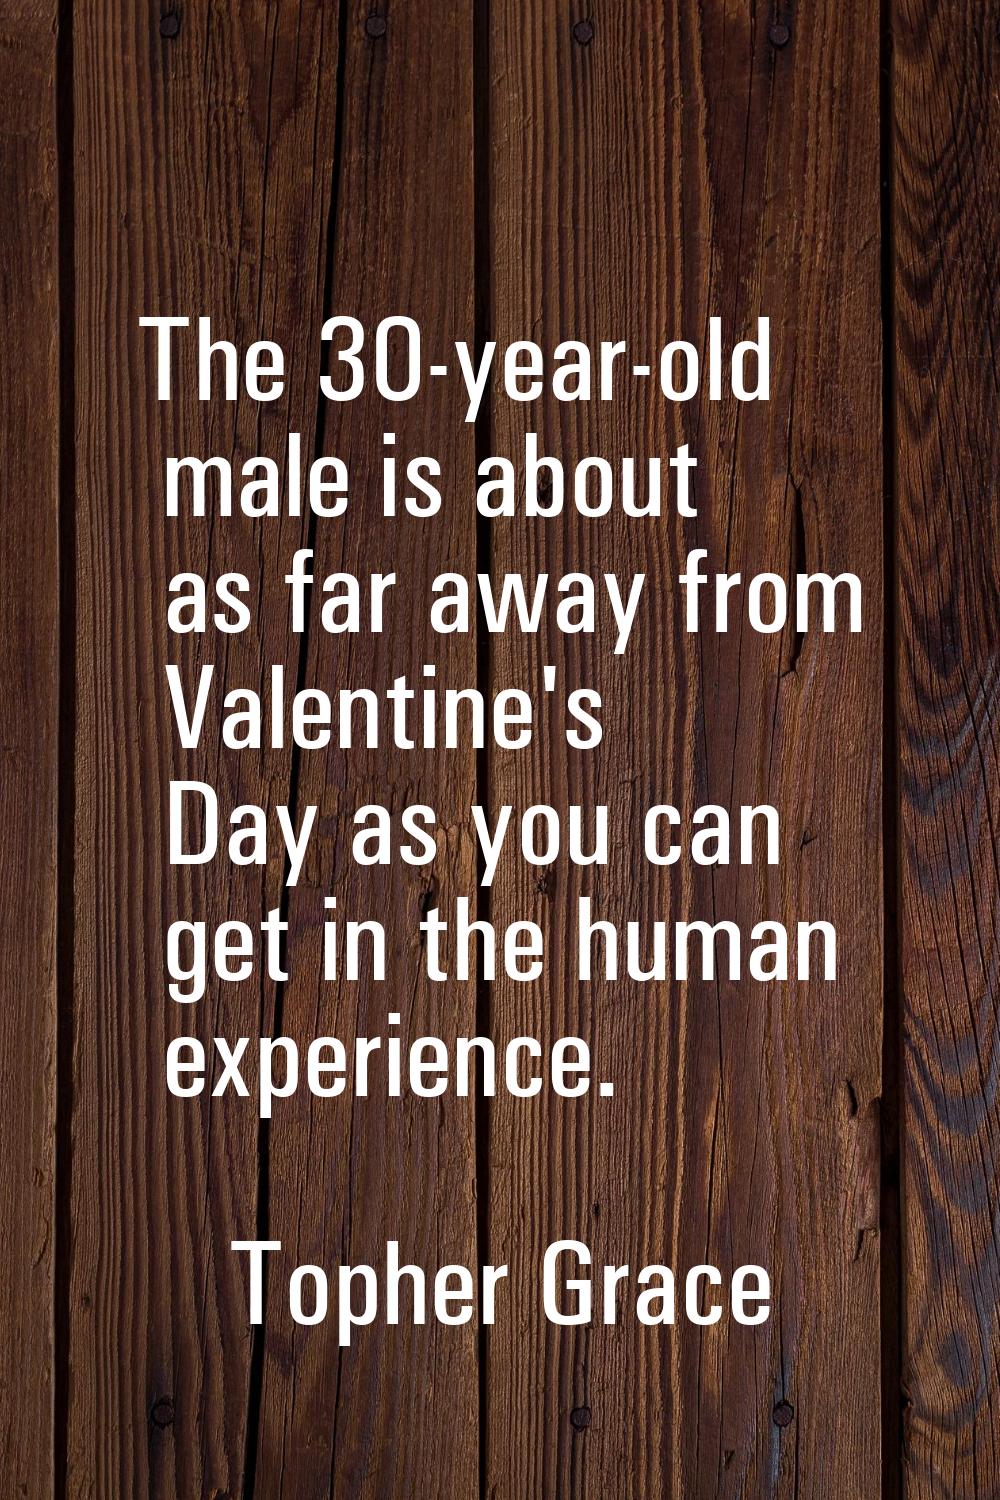 The 30-year-old male is about as far away from Valentine's Day as you can get in the human experien